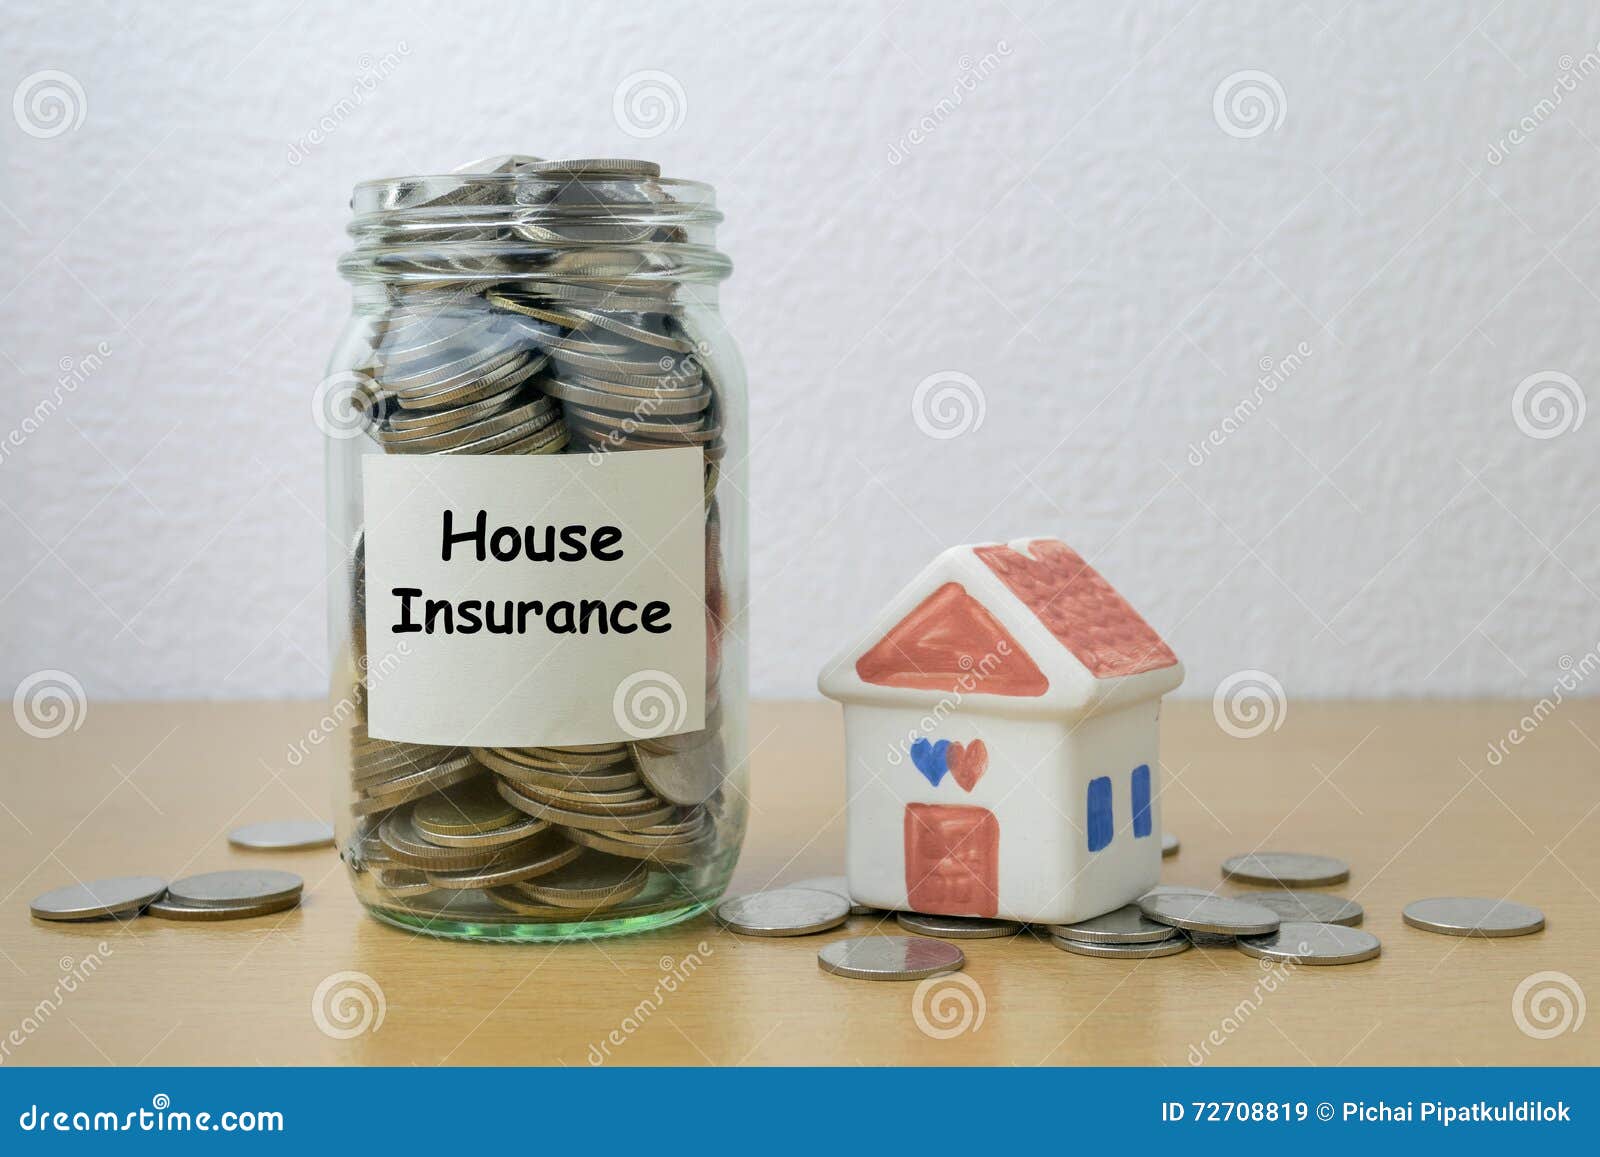 Money Saving For House Insurance Stock Image - Image of collect, currency: 72708819